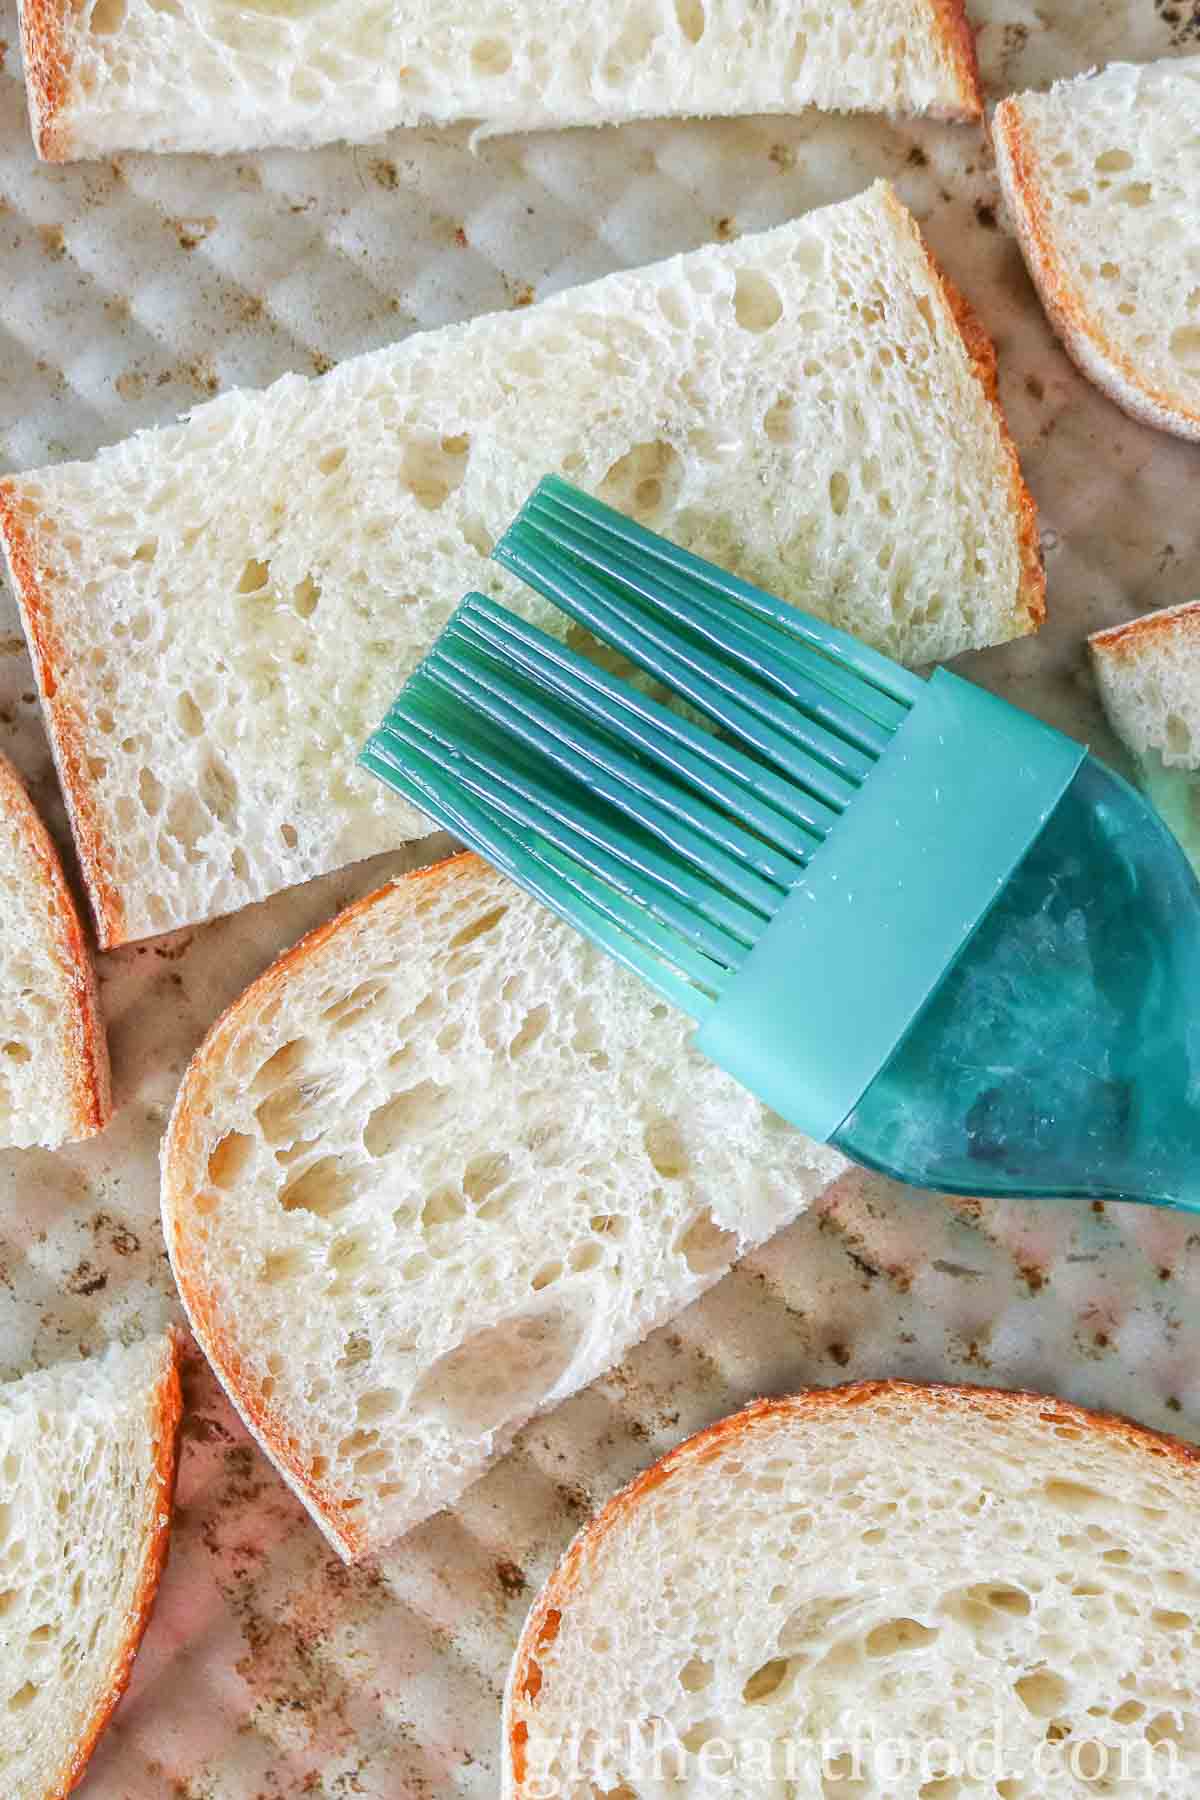 Brushing olive oil over some bread with a silicone brush.